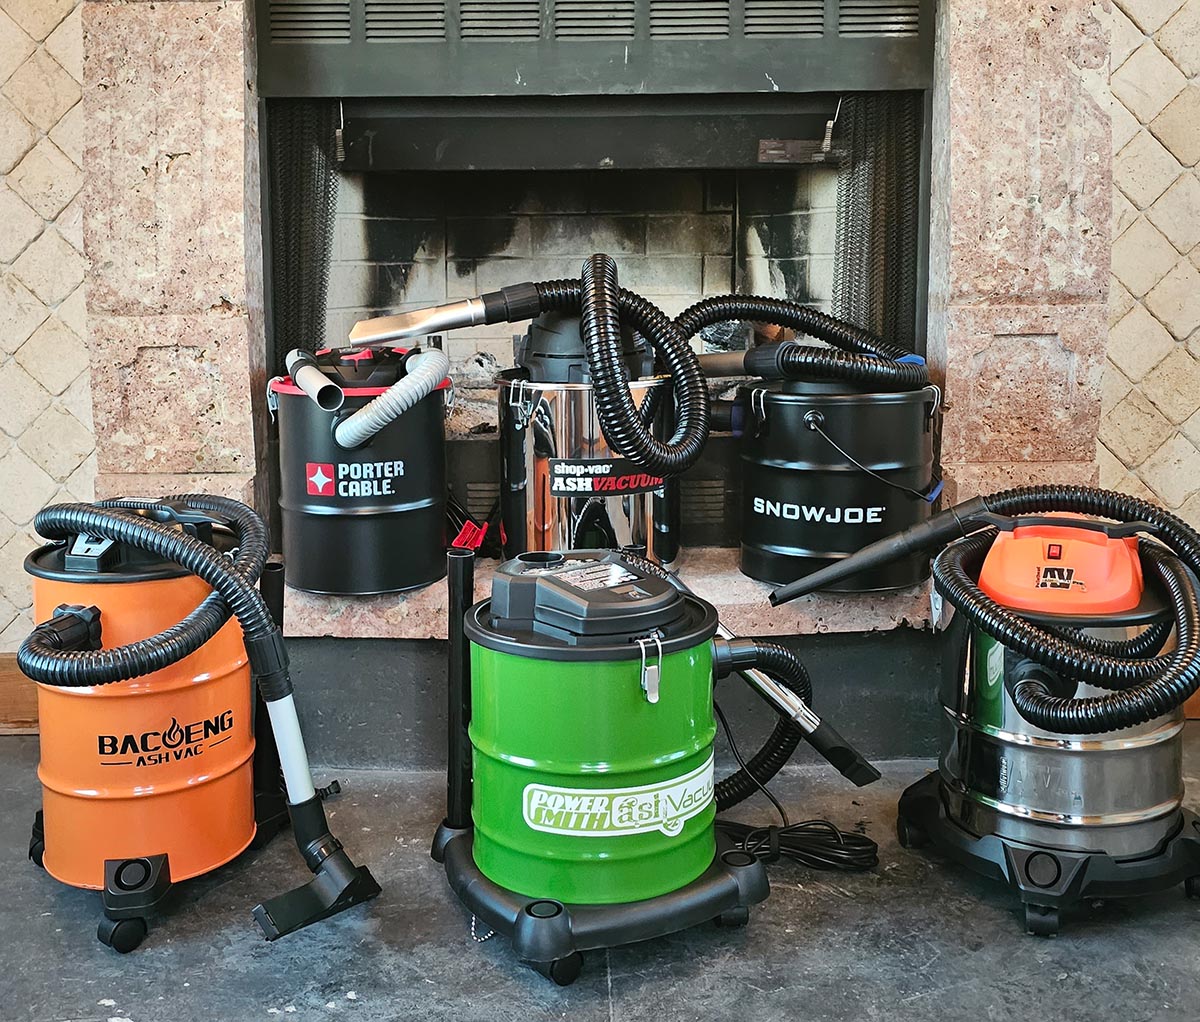 A group of the best tested ash vacuums placed together in front of an indoor fireplace.